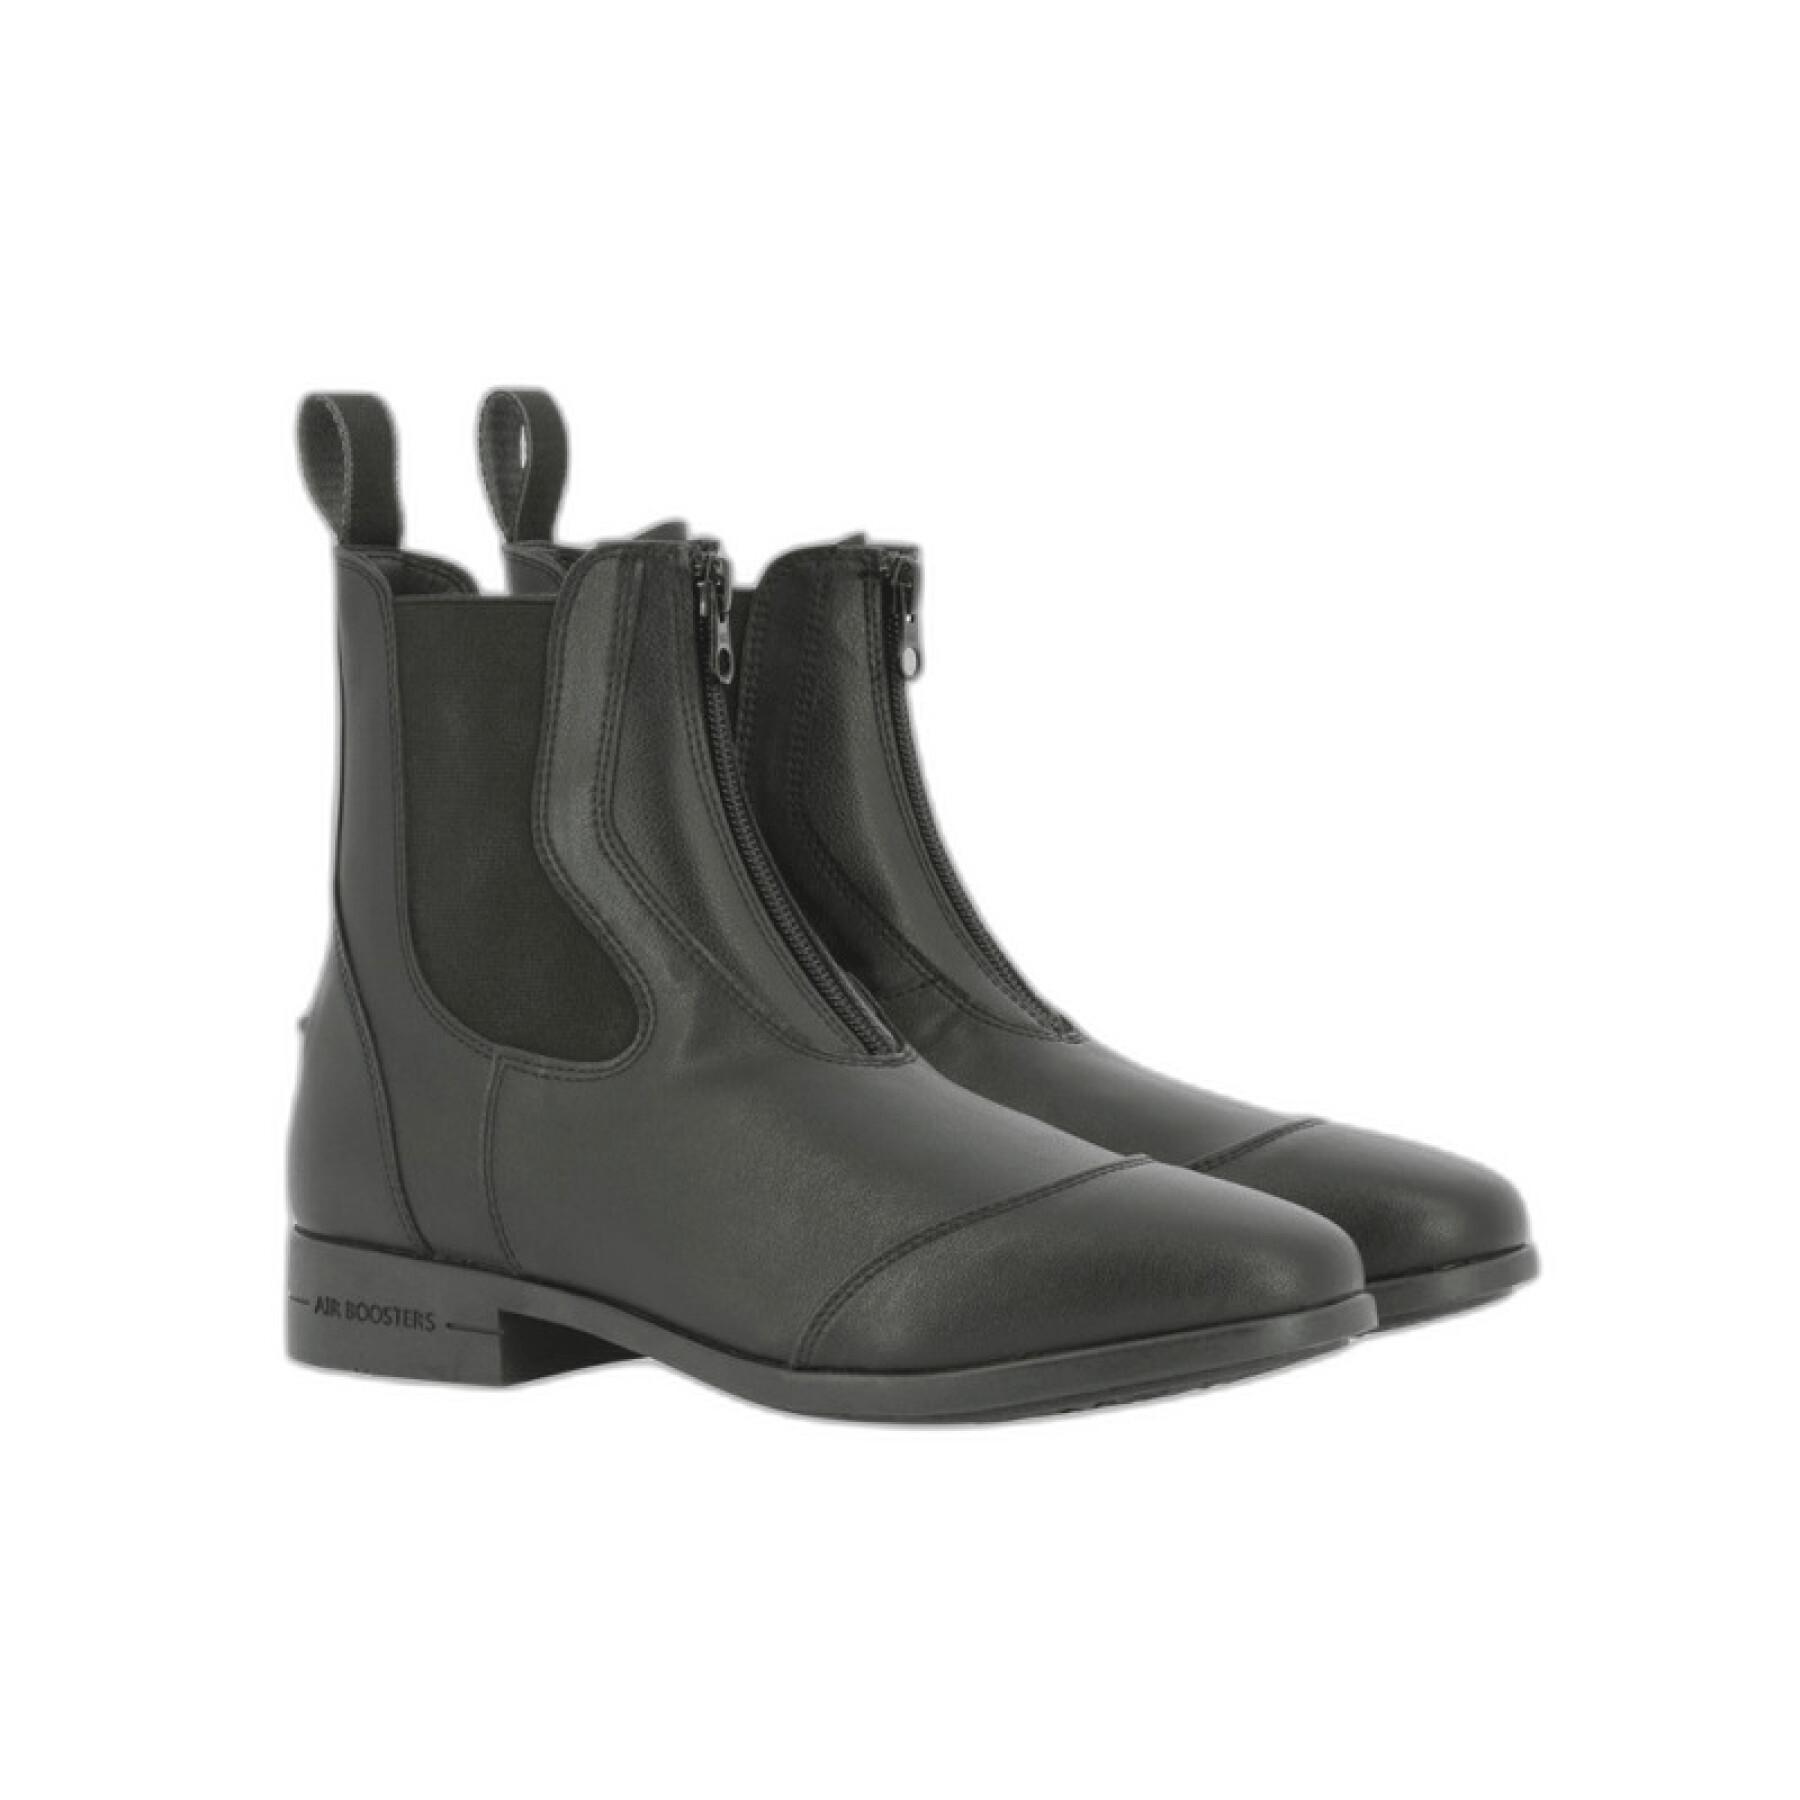 Riding boots with zip and laces Equithème Zurich